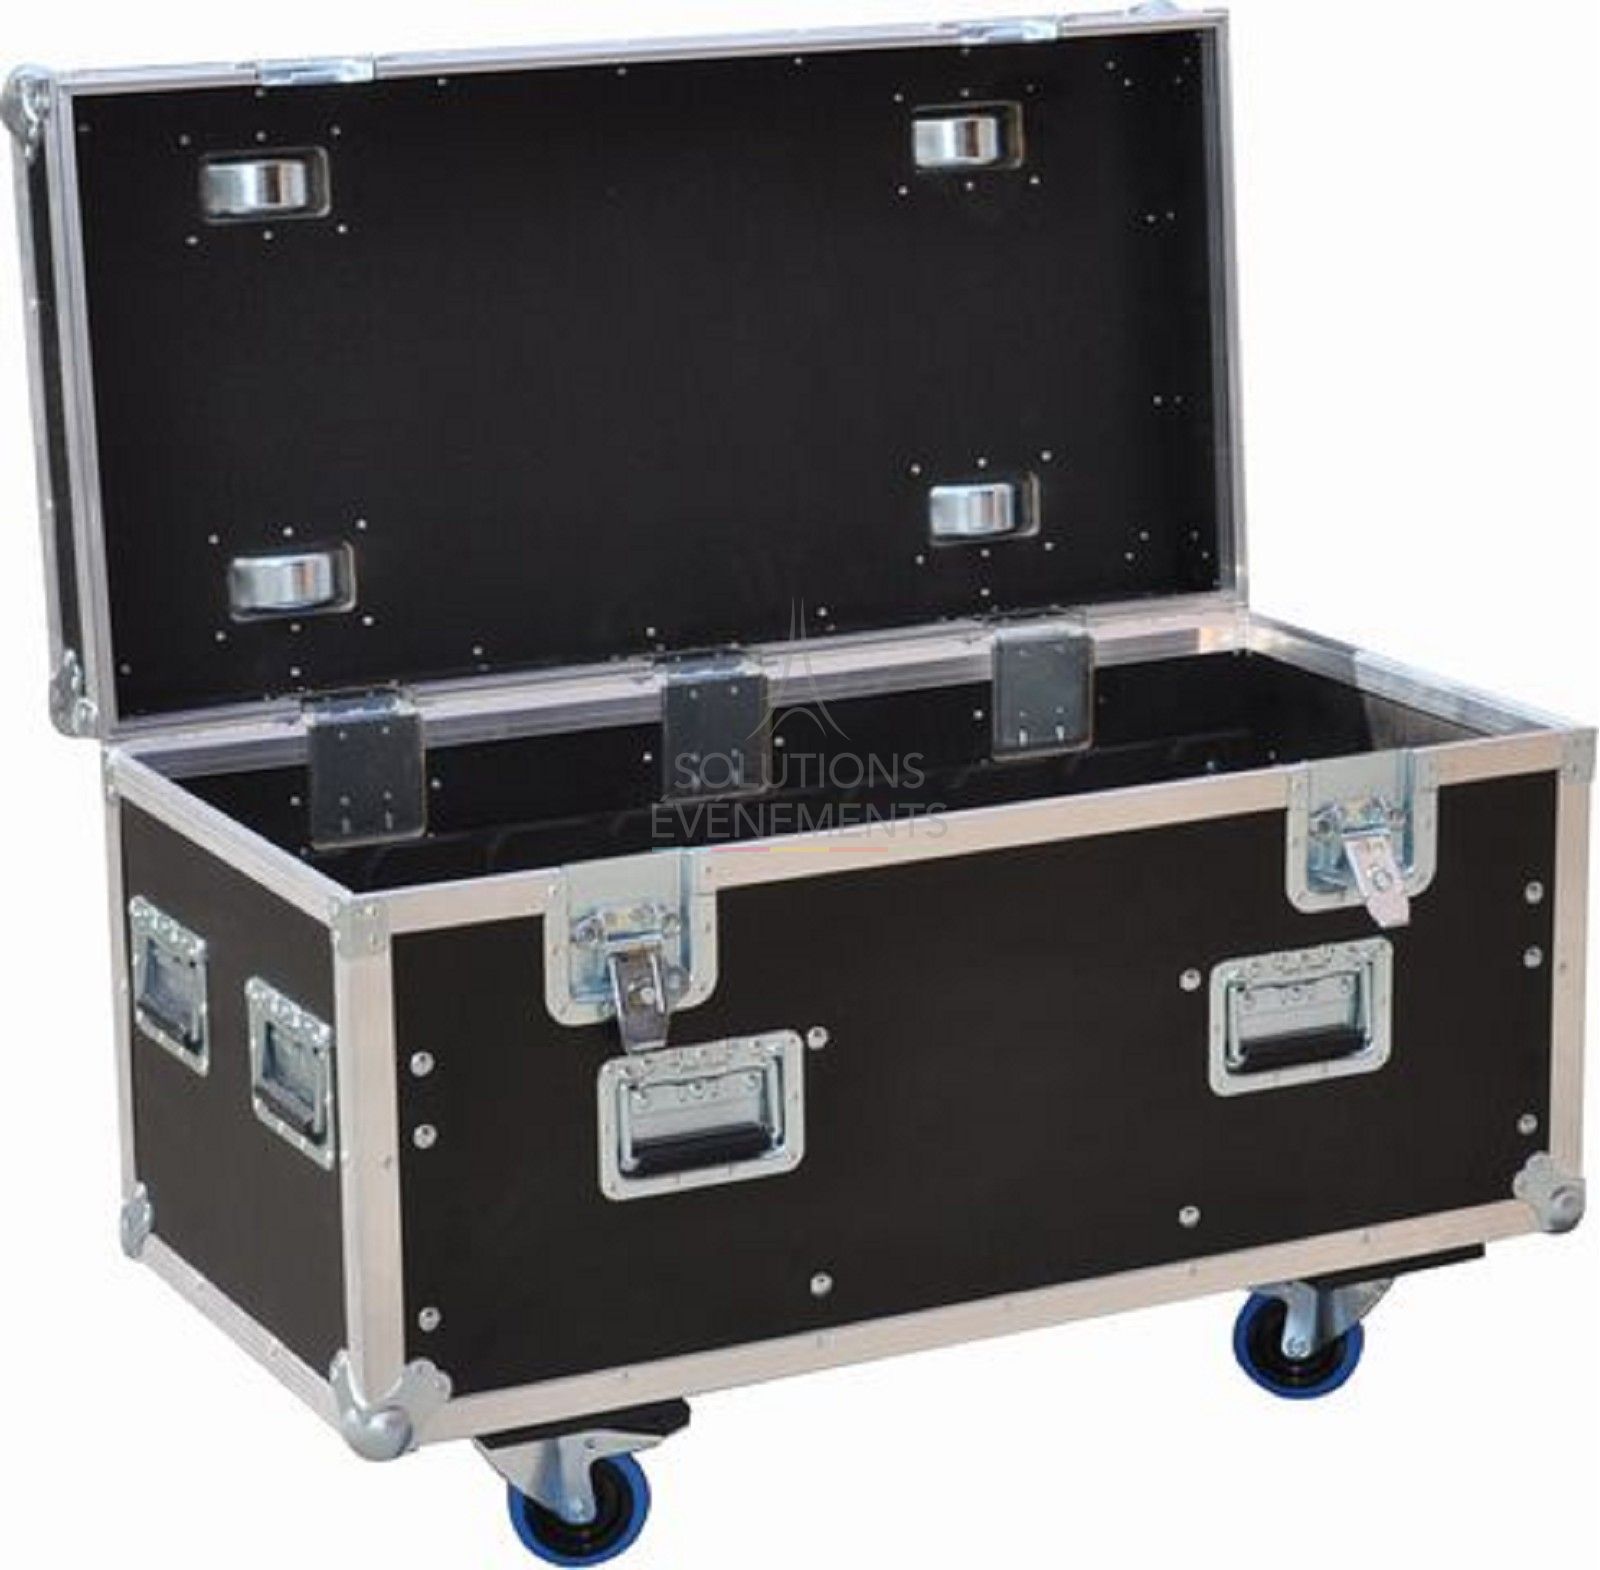 Flight case rental with wheels and brakes